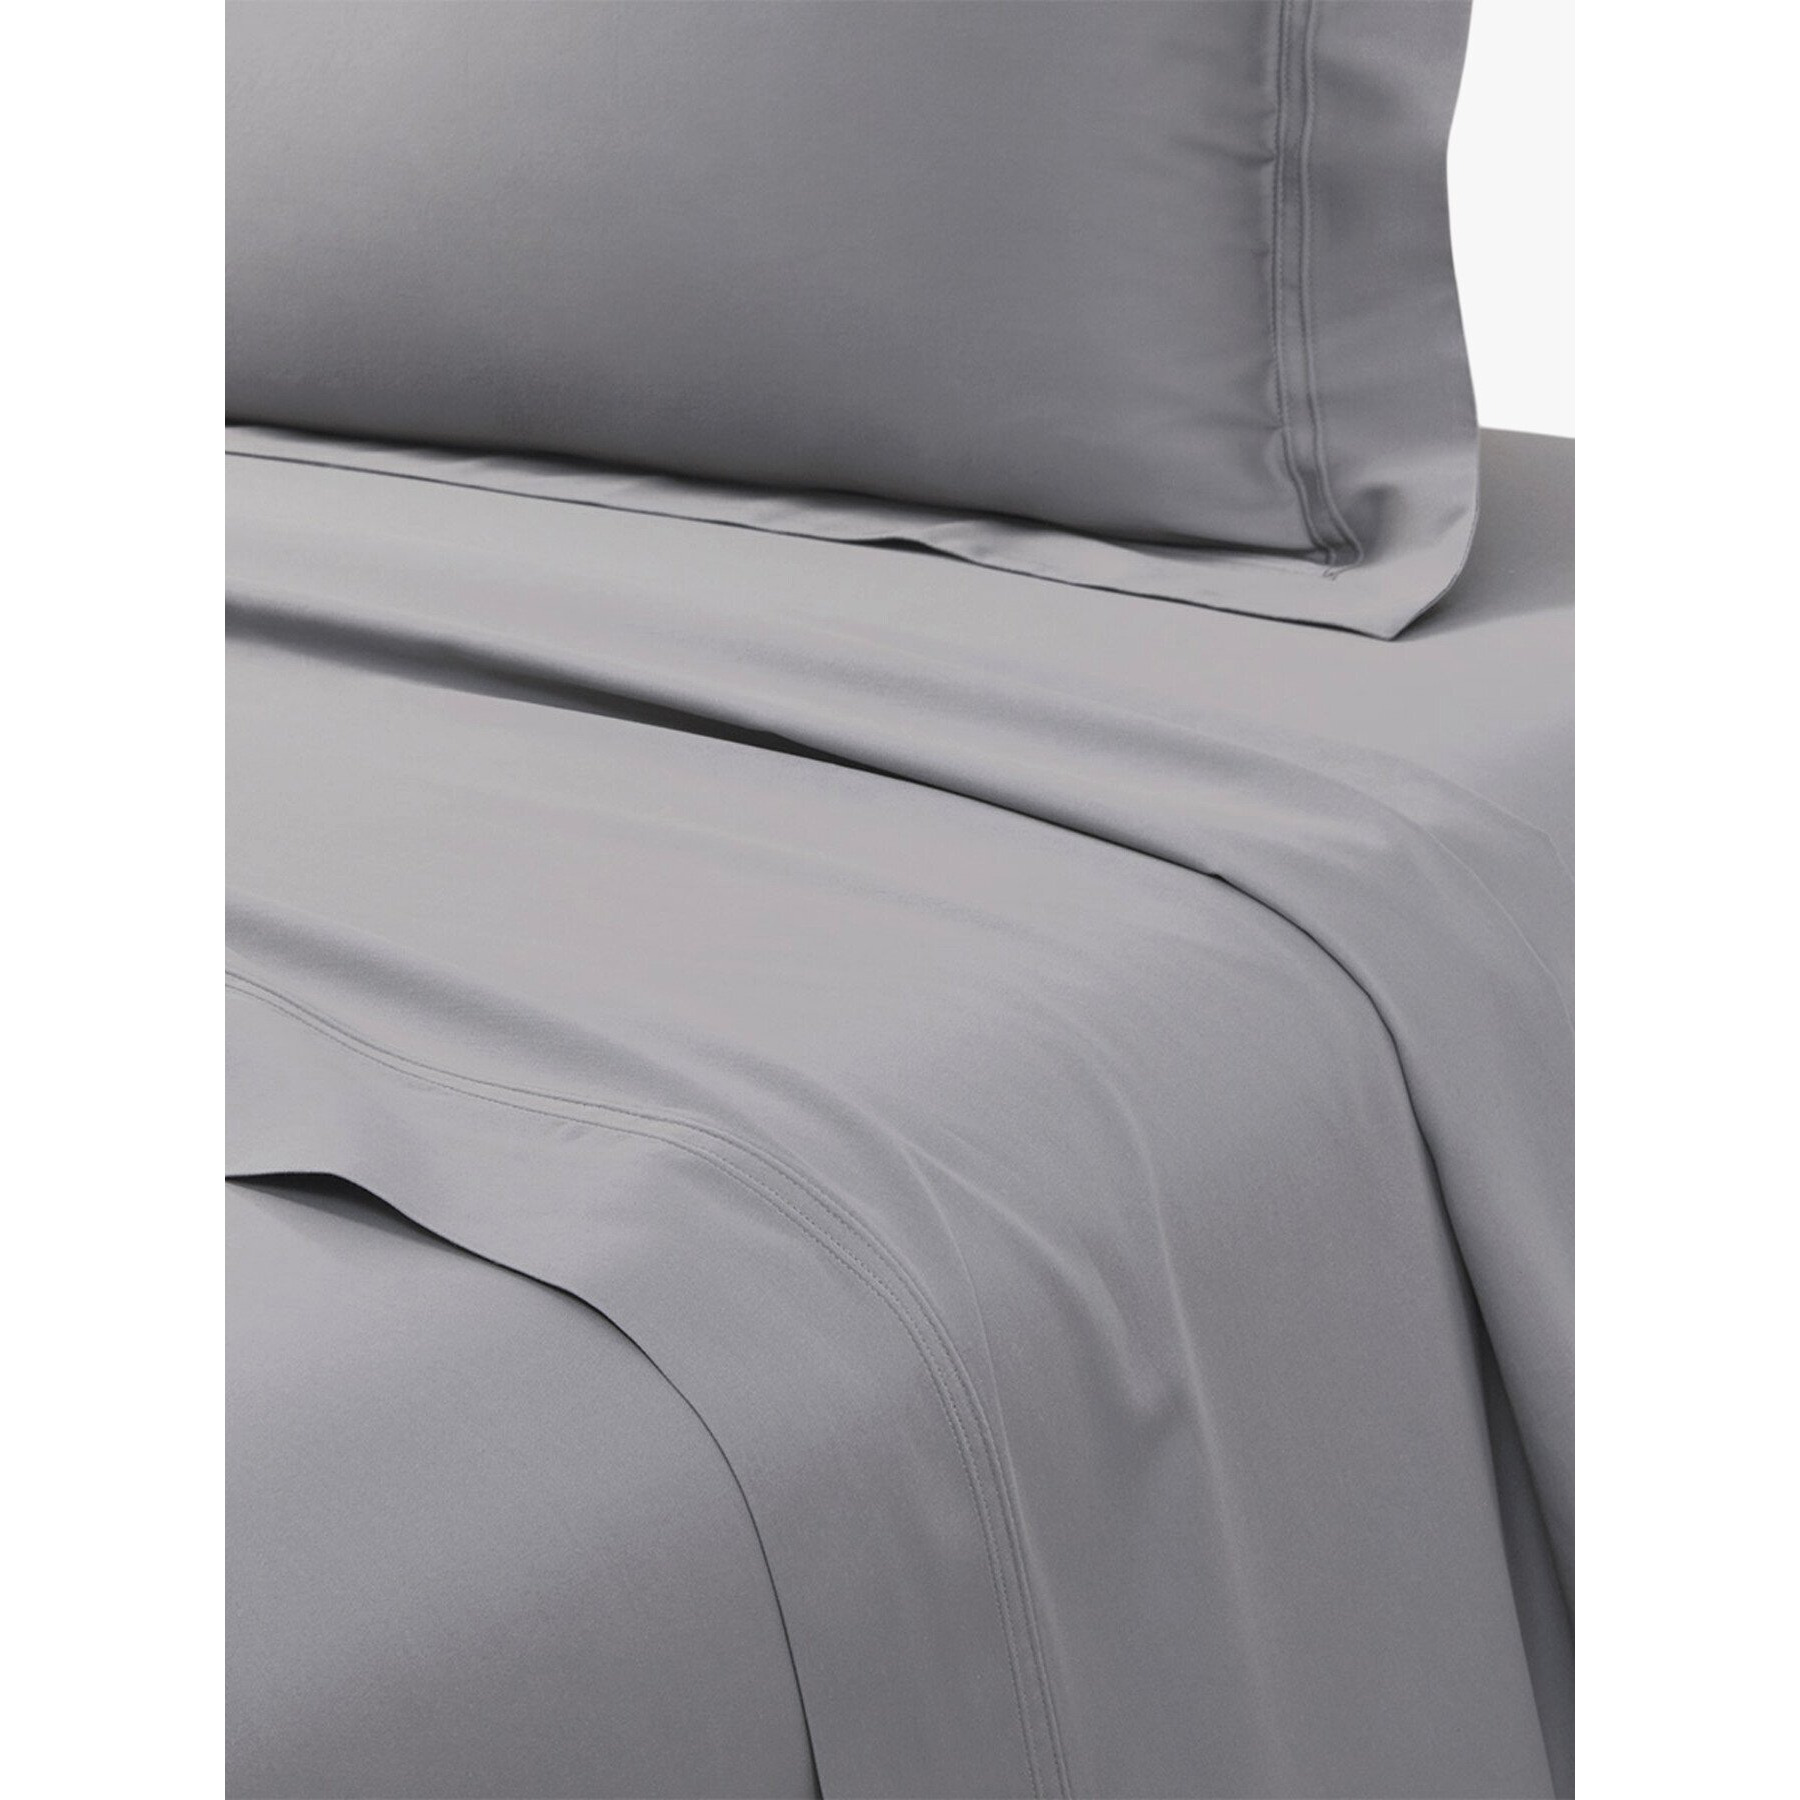 Yves Delorme Triomphe Flat Sheet - Size Double Grey - image 1